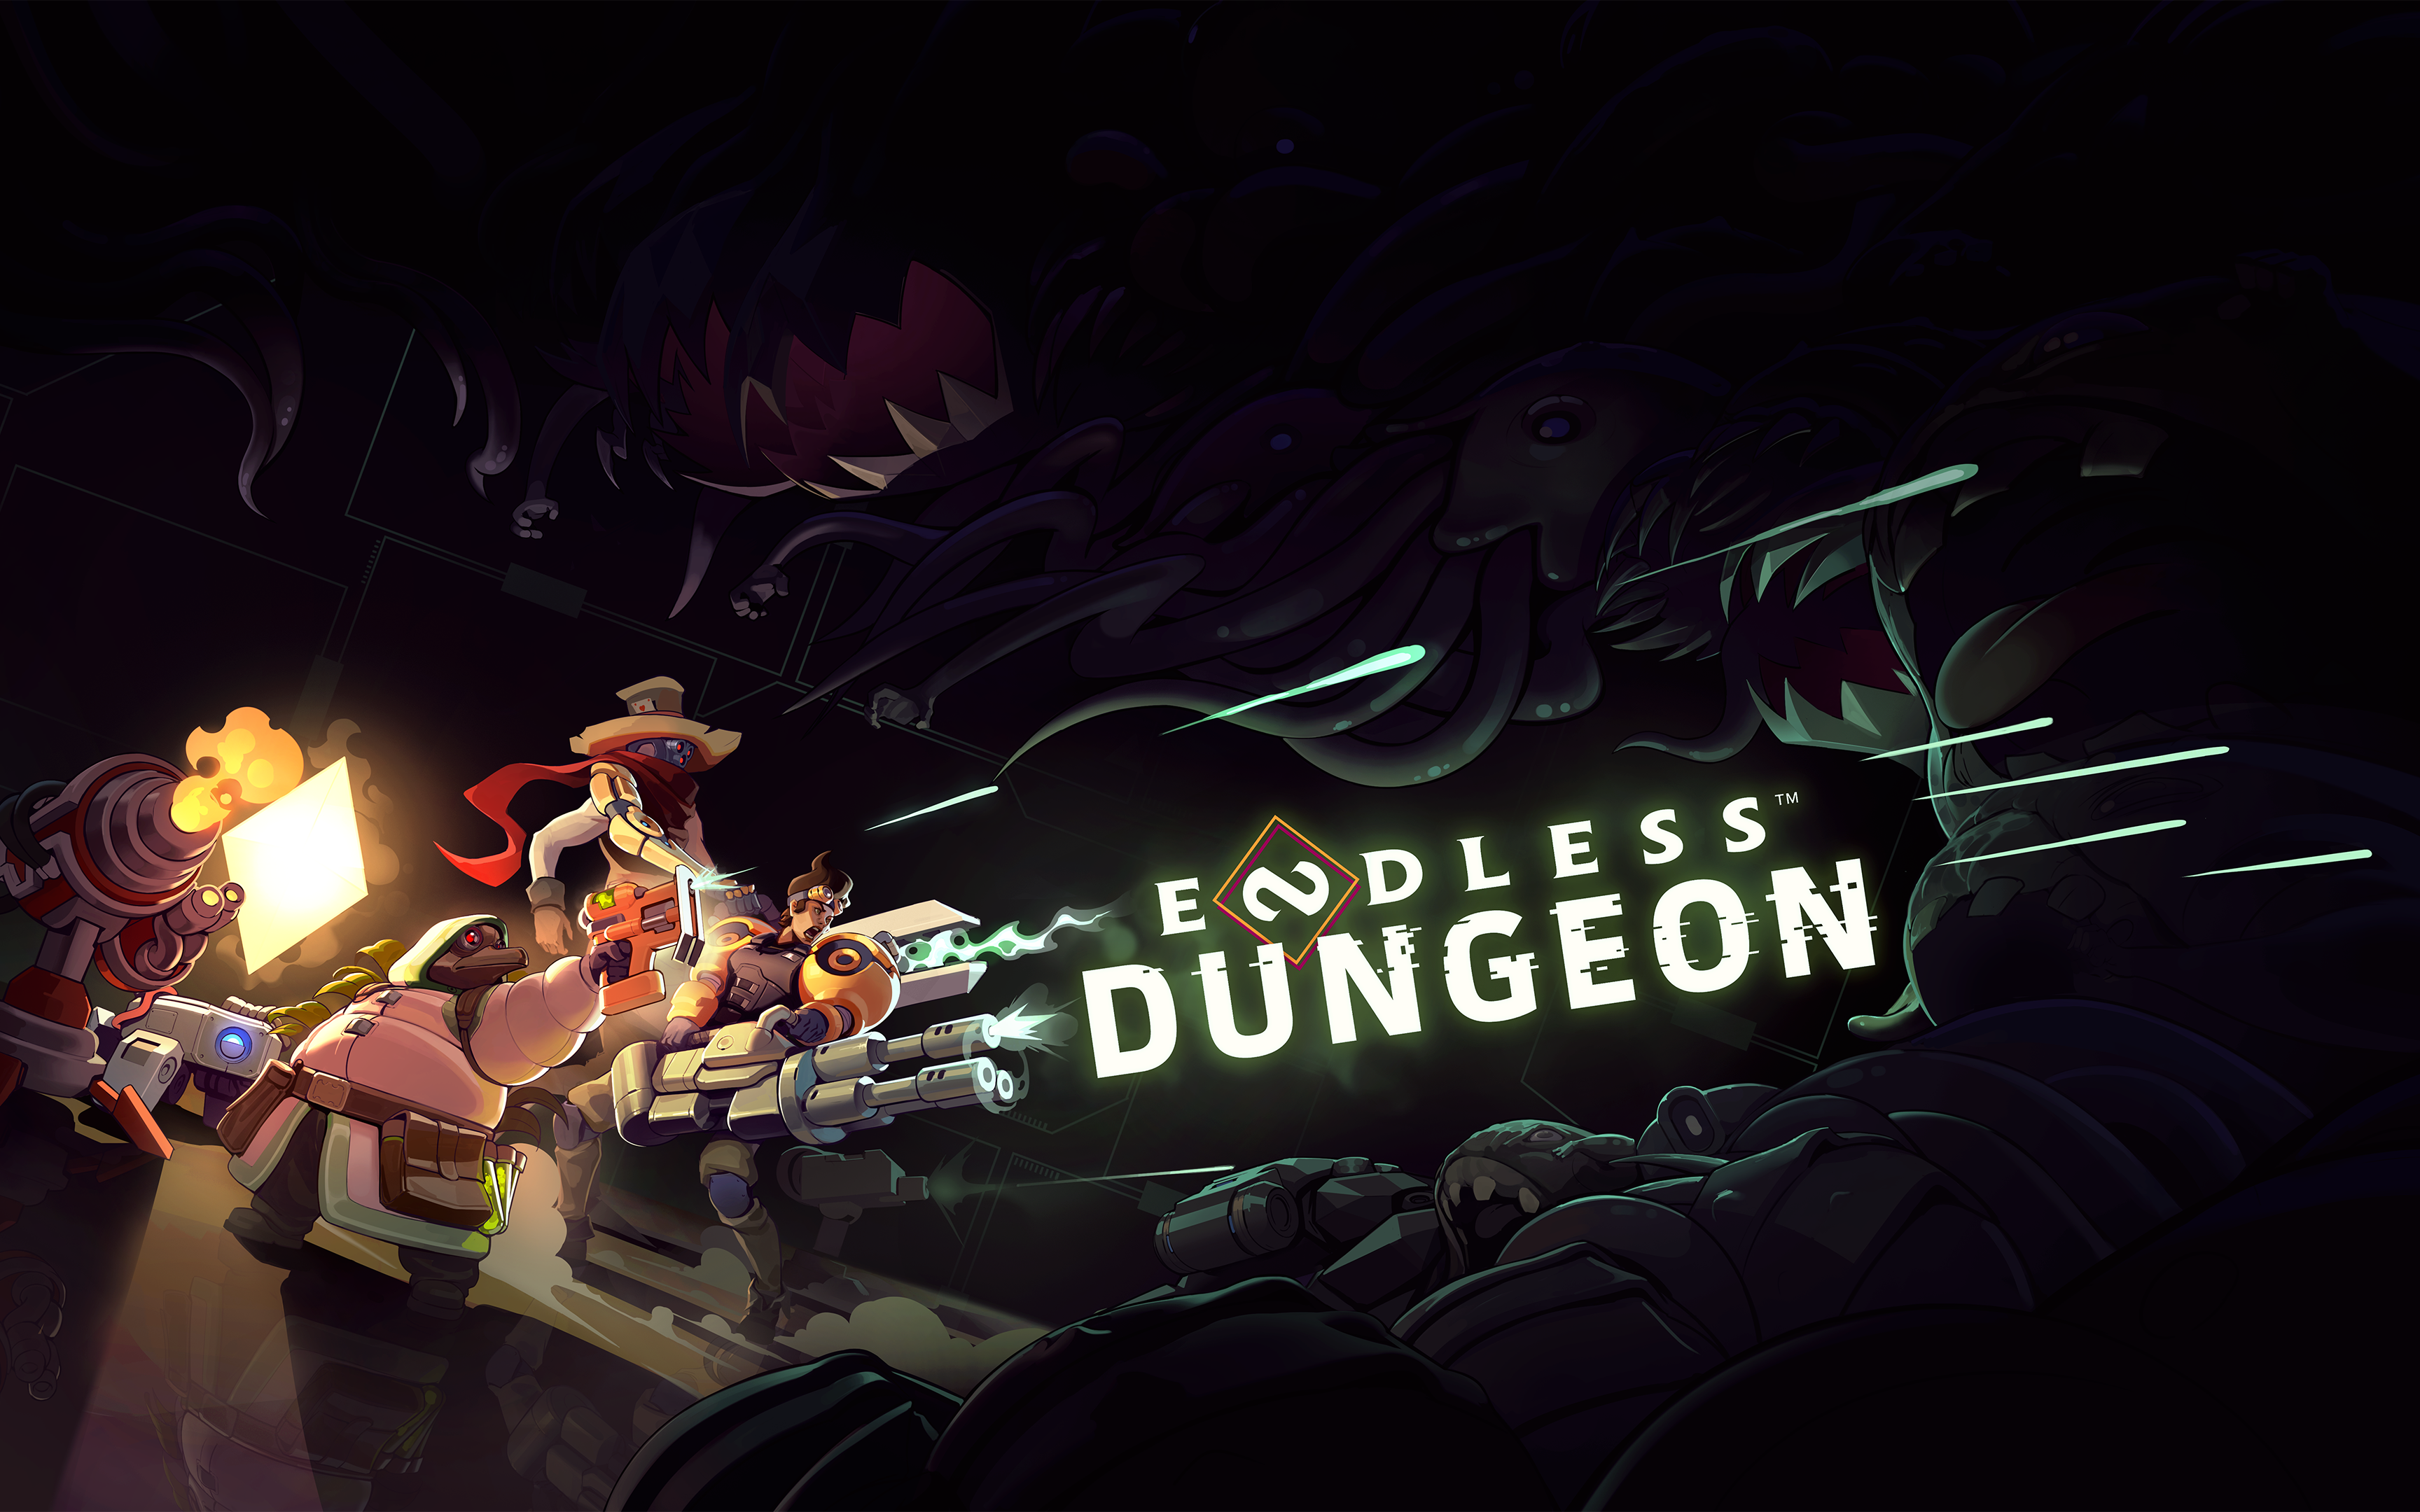 Endless Dungeon